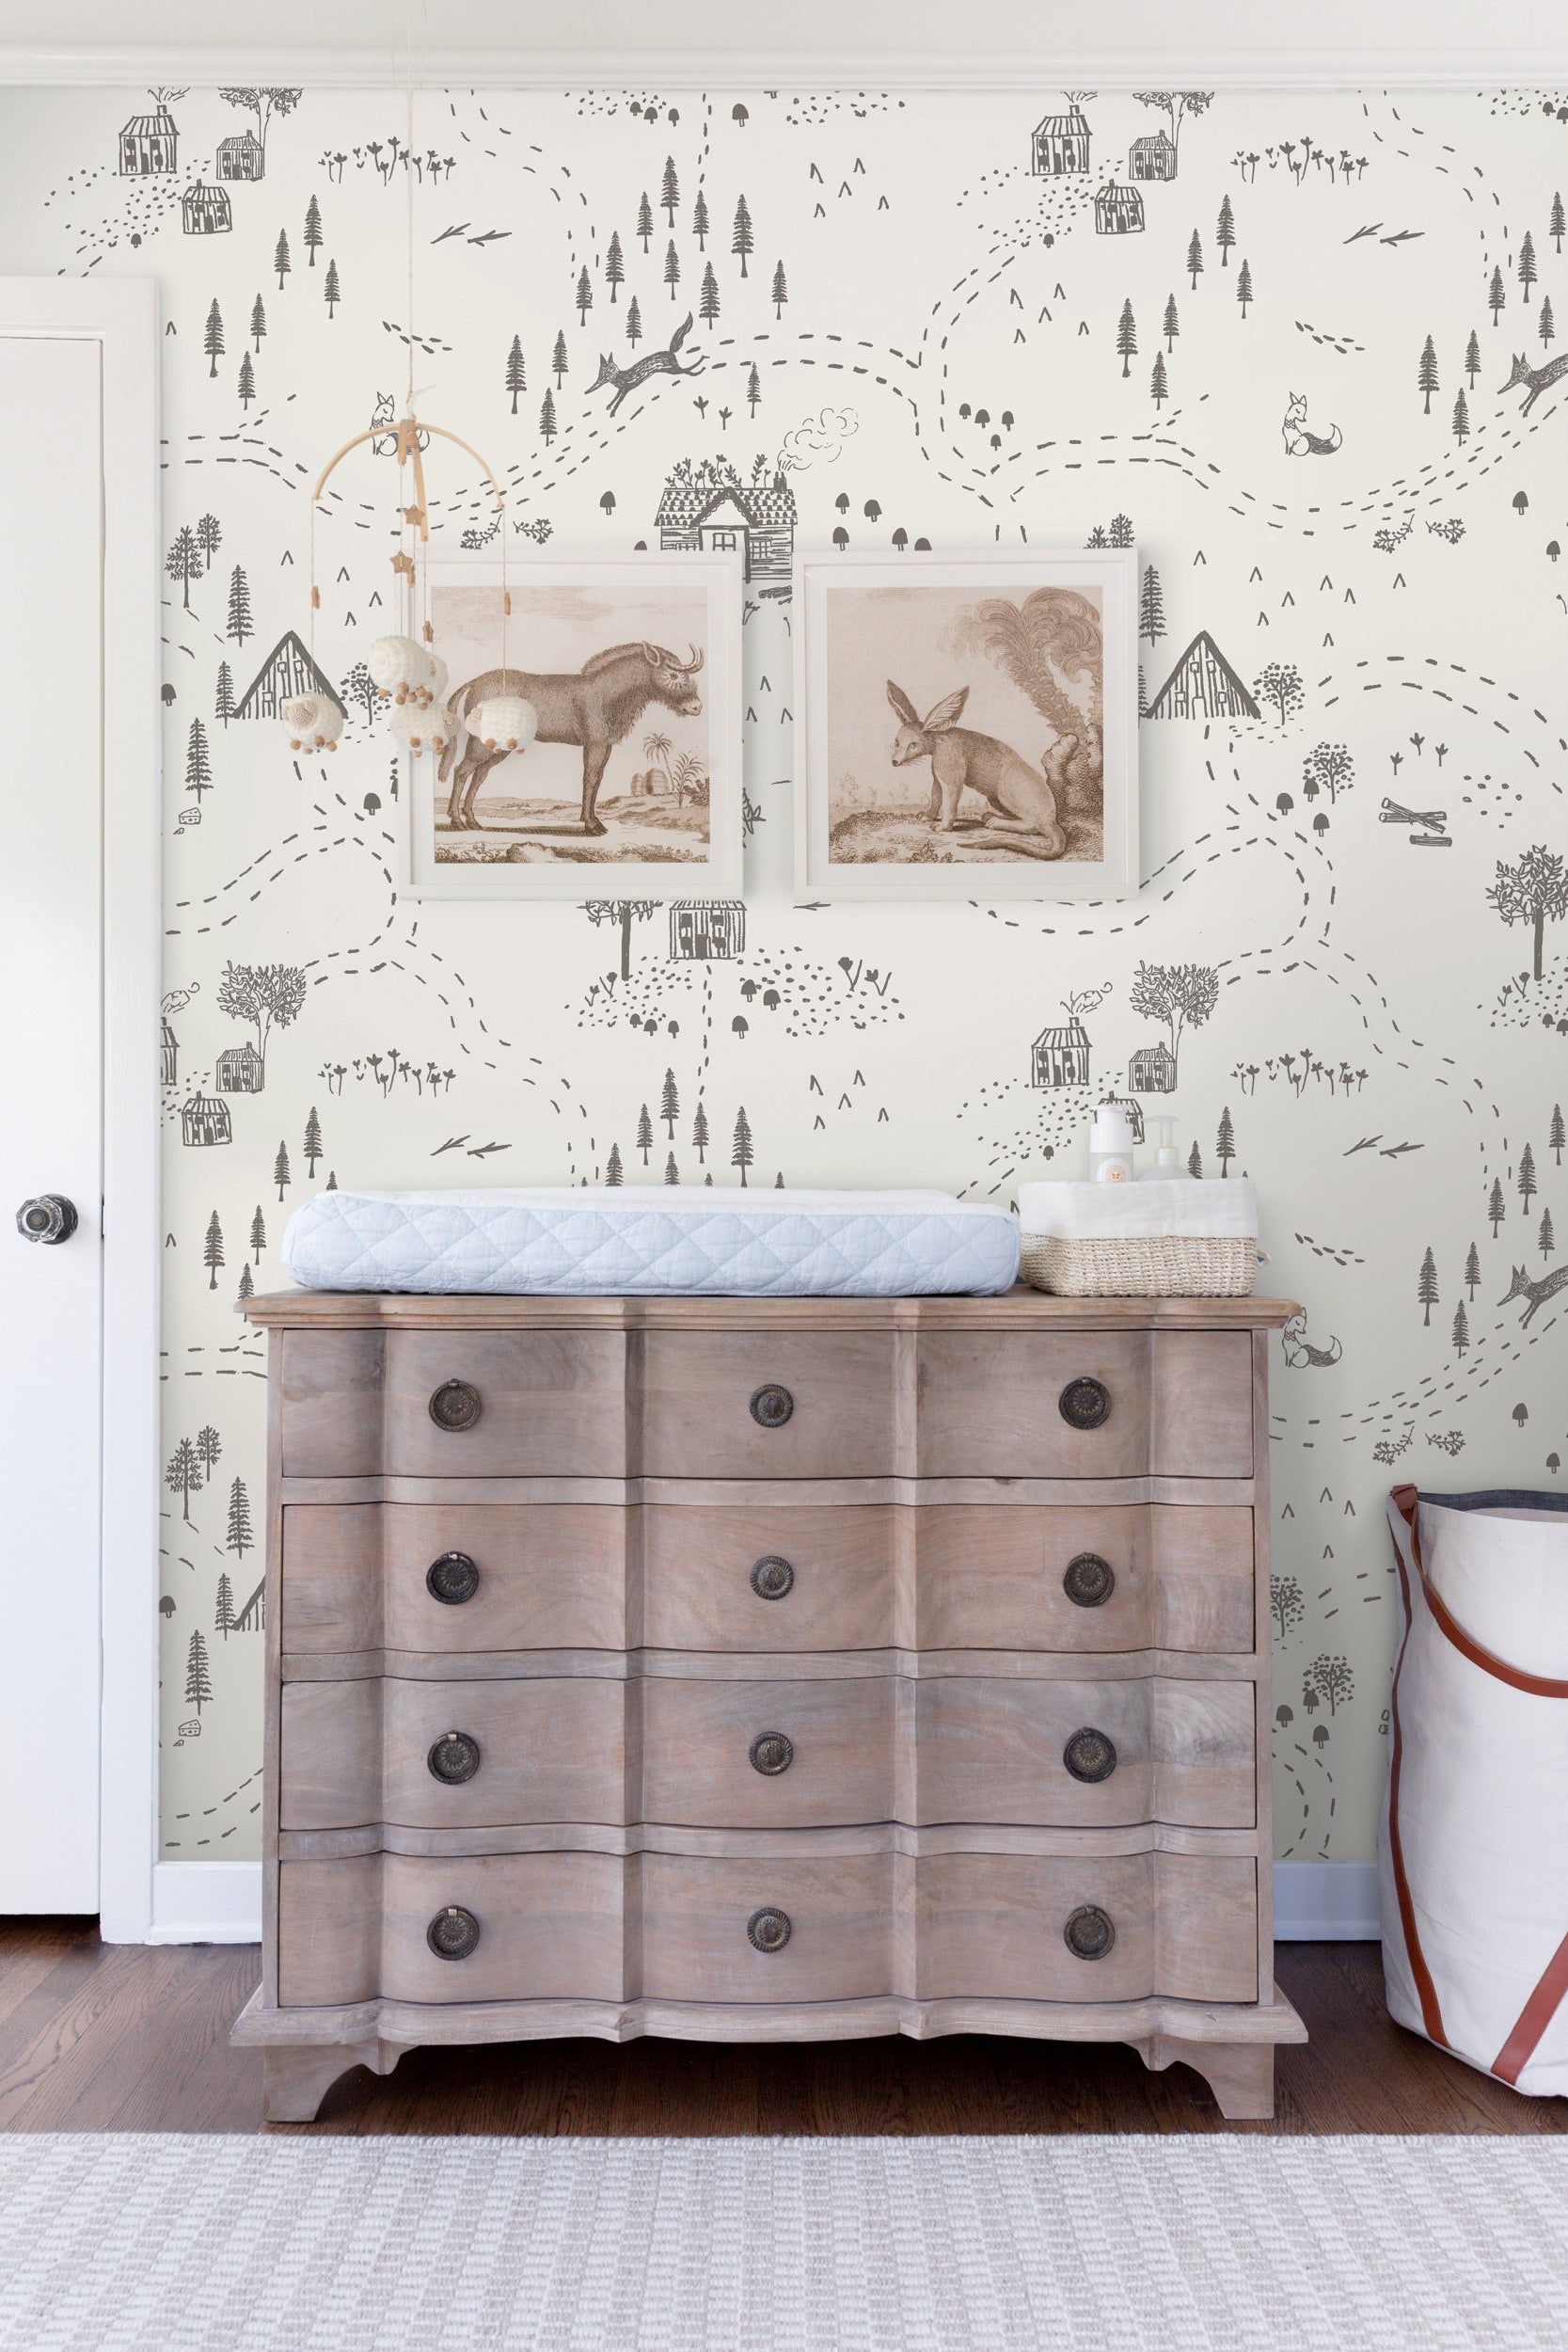 The rustic Through the Woods black and white wallpaper from Rylee + Cru is a backdrop to a whitewashed wood dresser with a changing pad on top in this nursery.